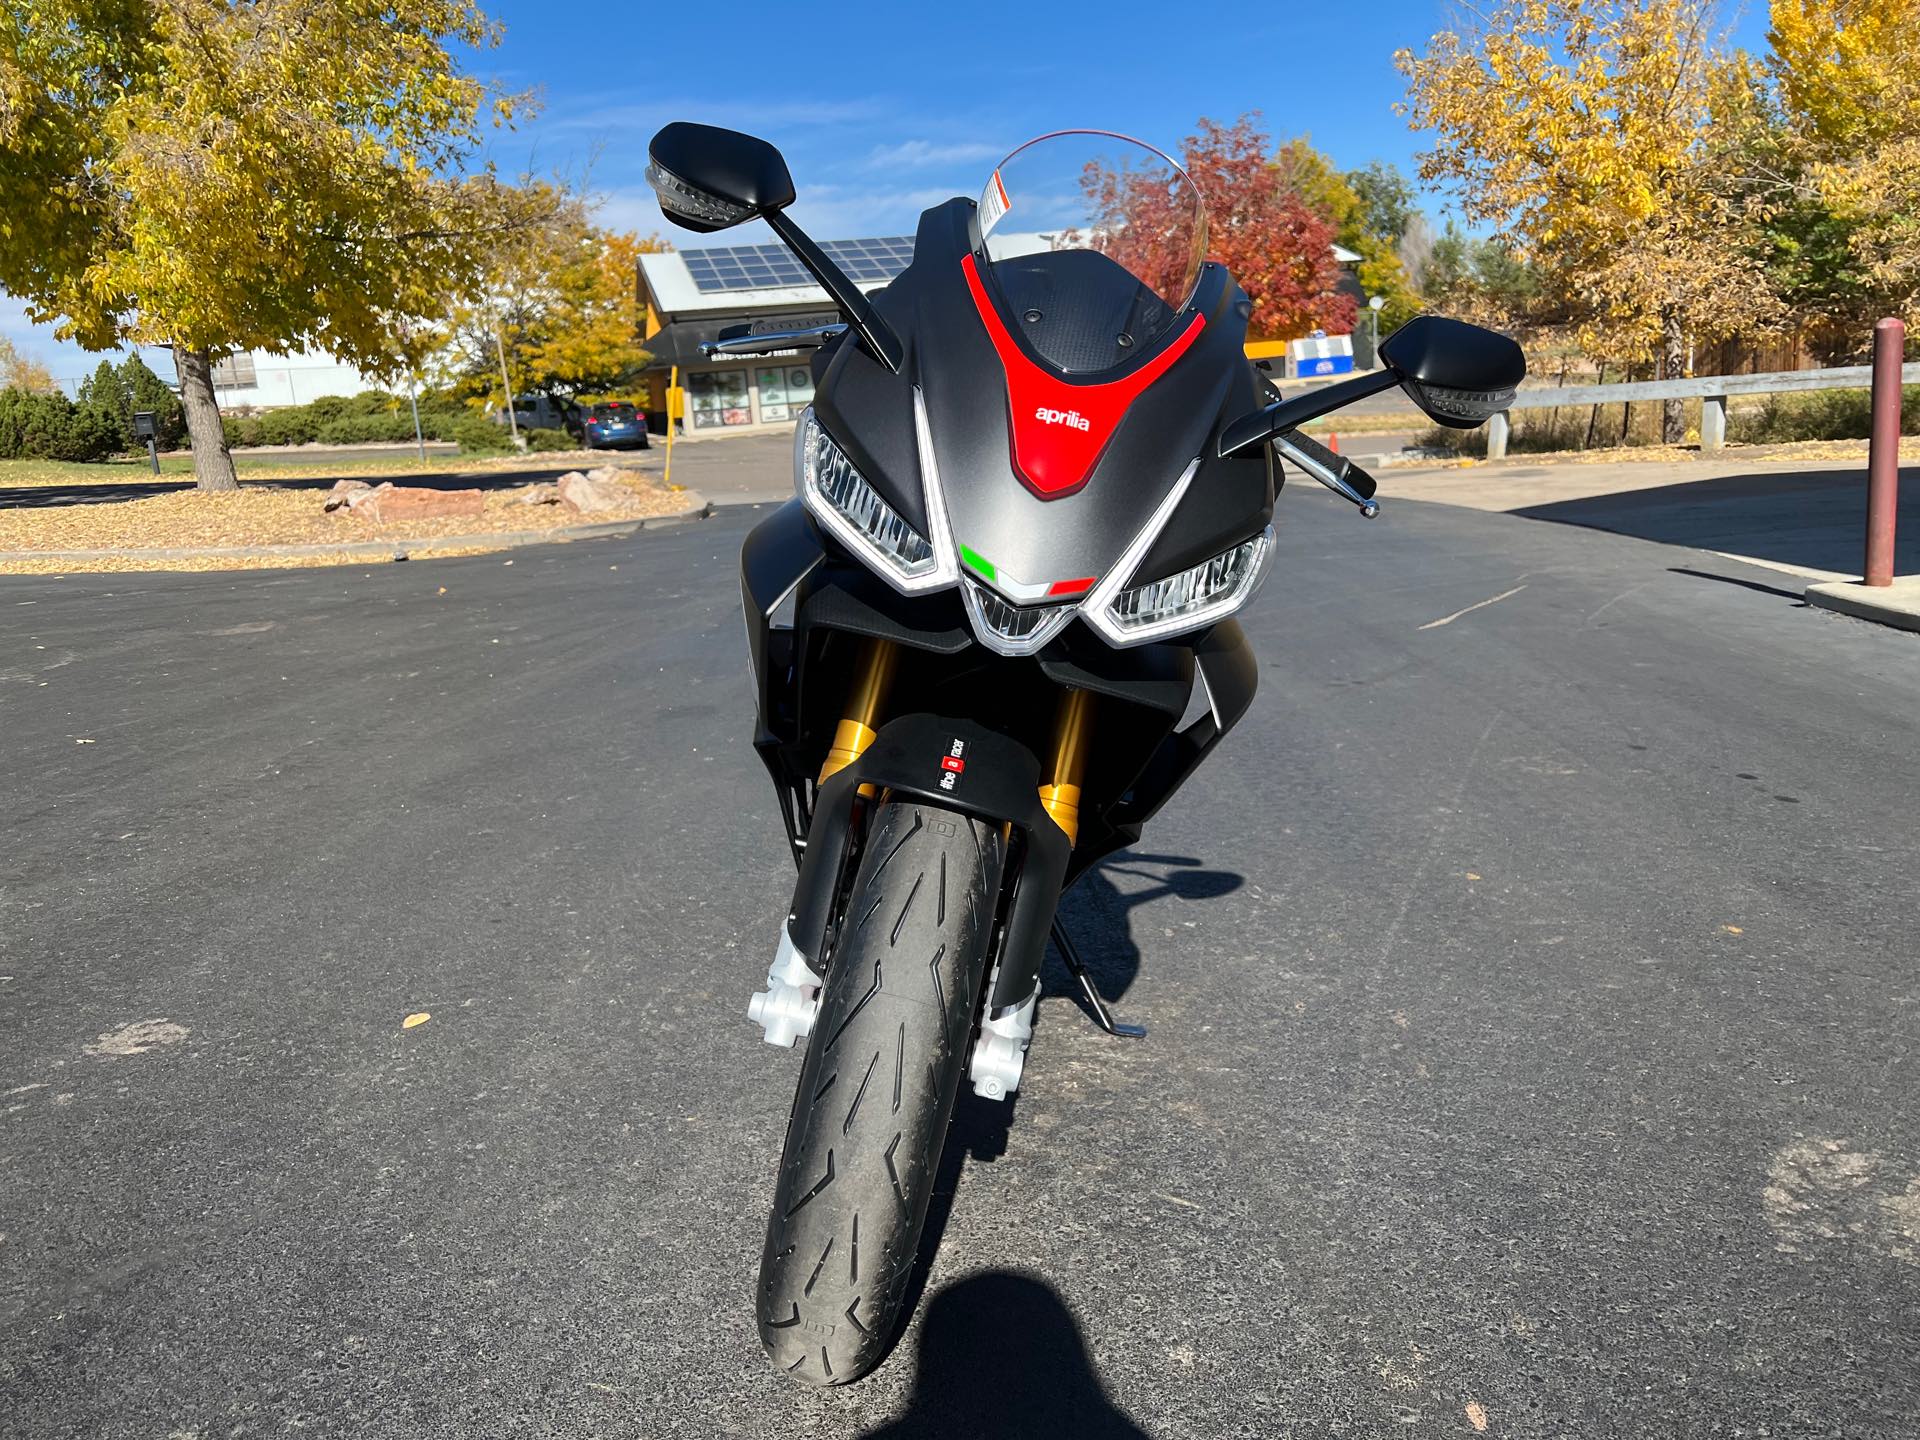 2022 Aprilia RS 660 at Aces Motorcycles - Fort Collins